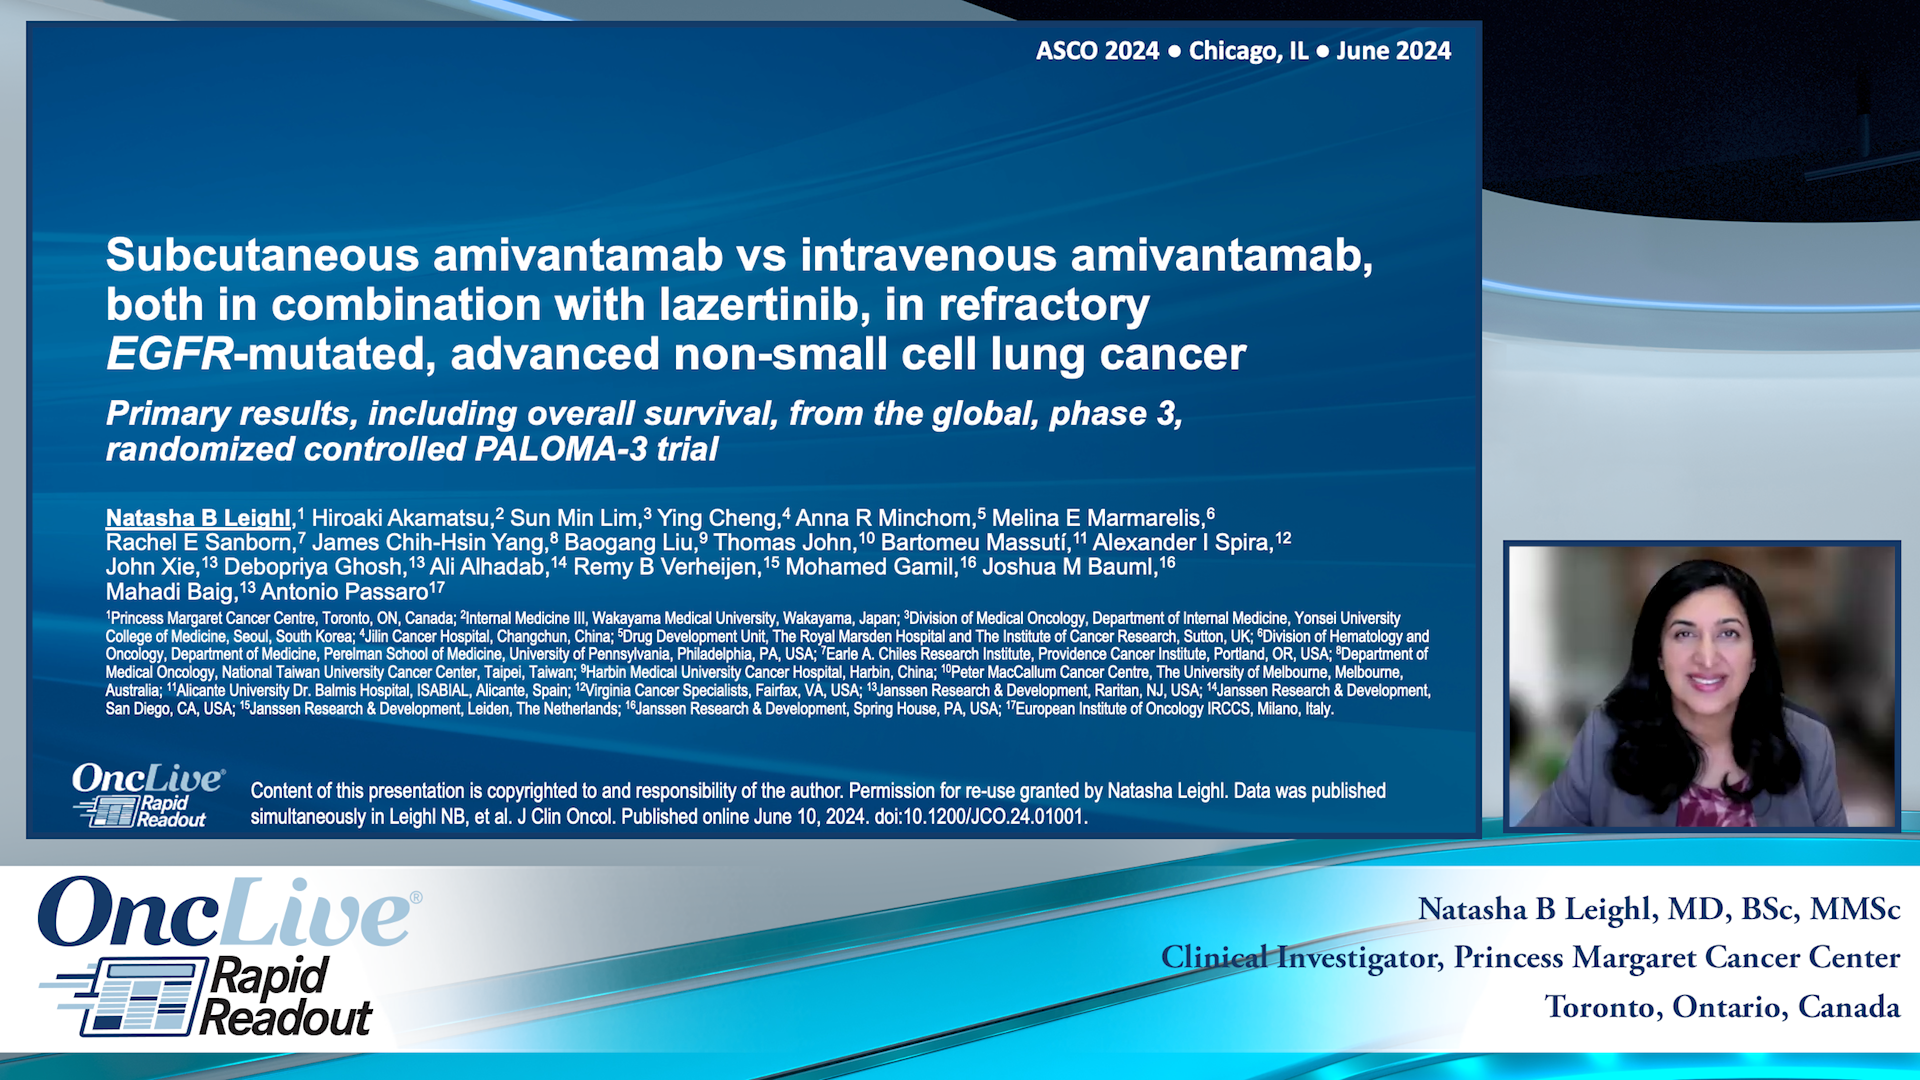  Subcutaneous amivantamab vs intravenous amivantamab, both in combination with lazertinib, in refractory EGFR-mutated, advanced non-small cell lung cancer (NSCLC): Primary results, including overall survival (OS), from the global, phase 3, randomized controlled PALOMA-3 trial